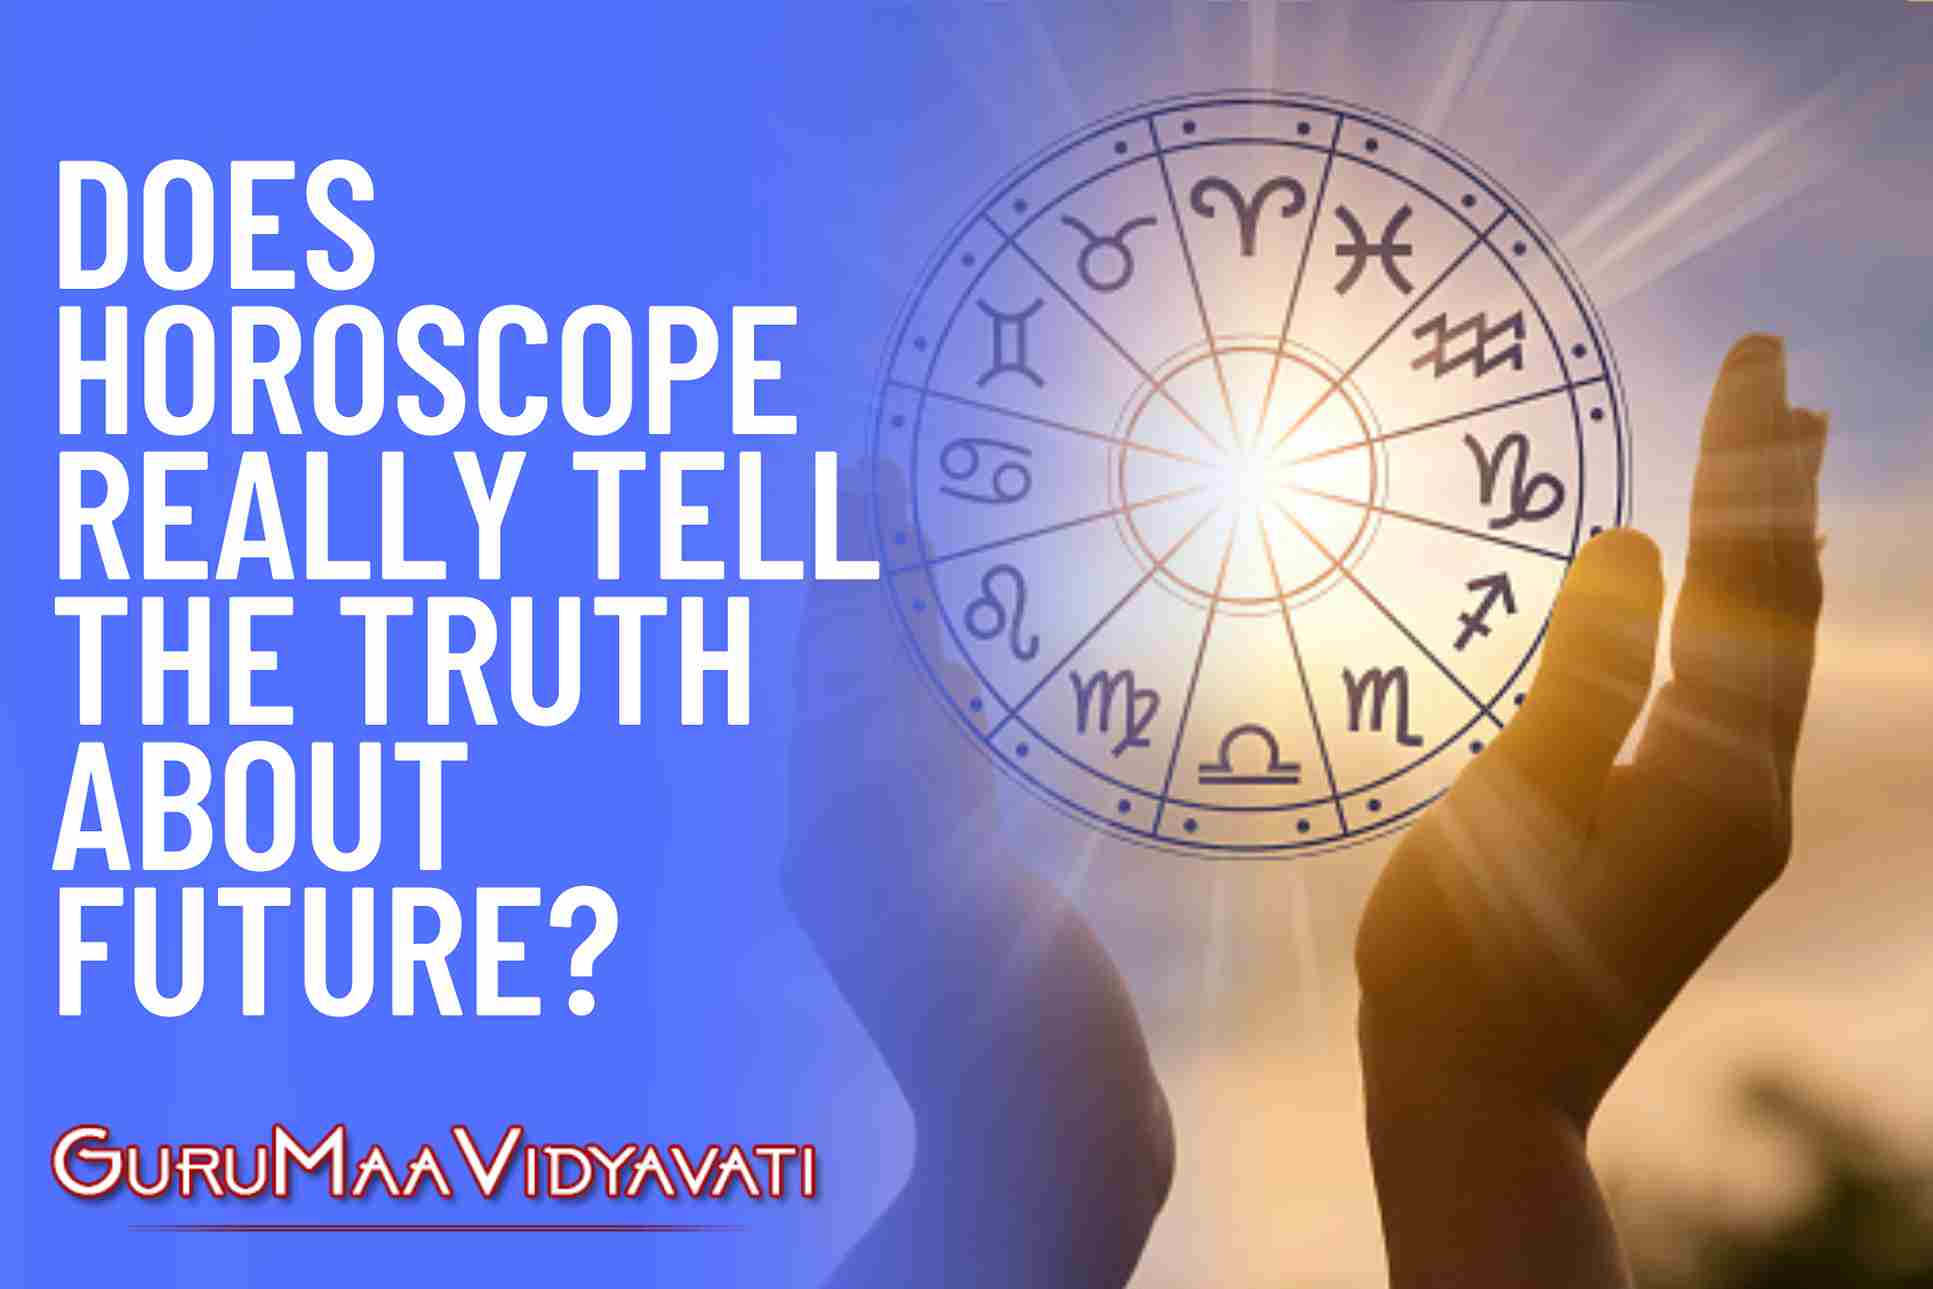 Does Horoscope Really tell the Truth about Future?